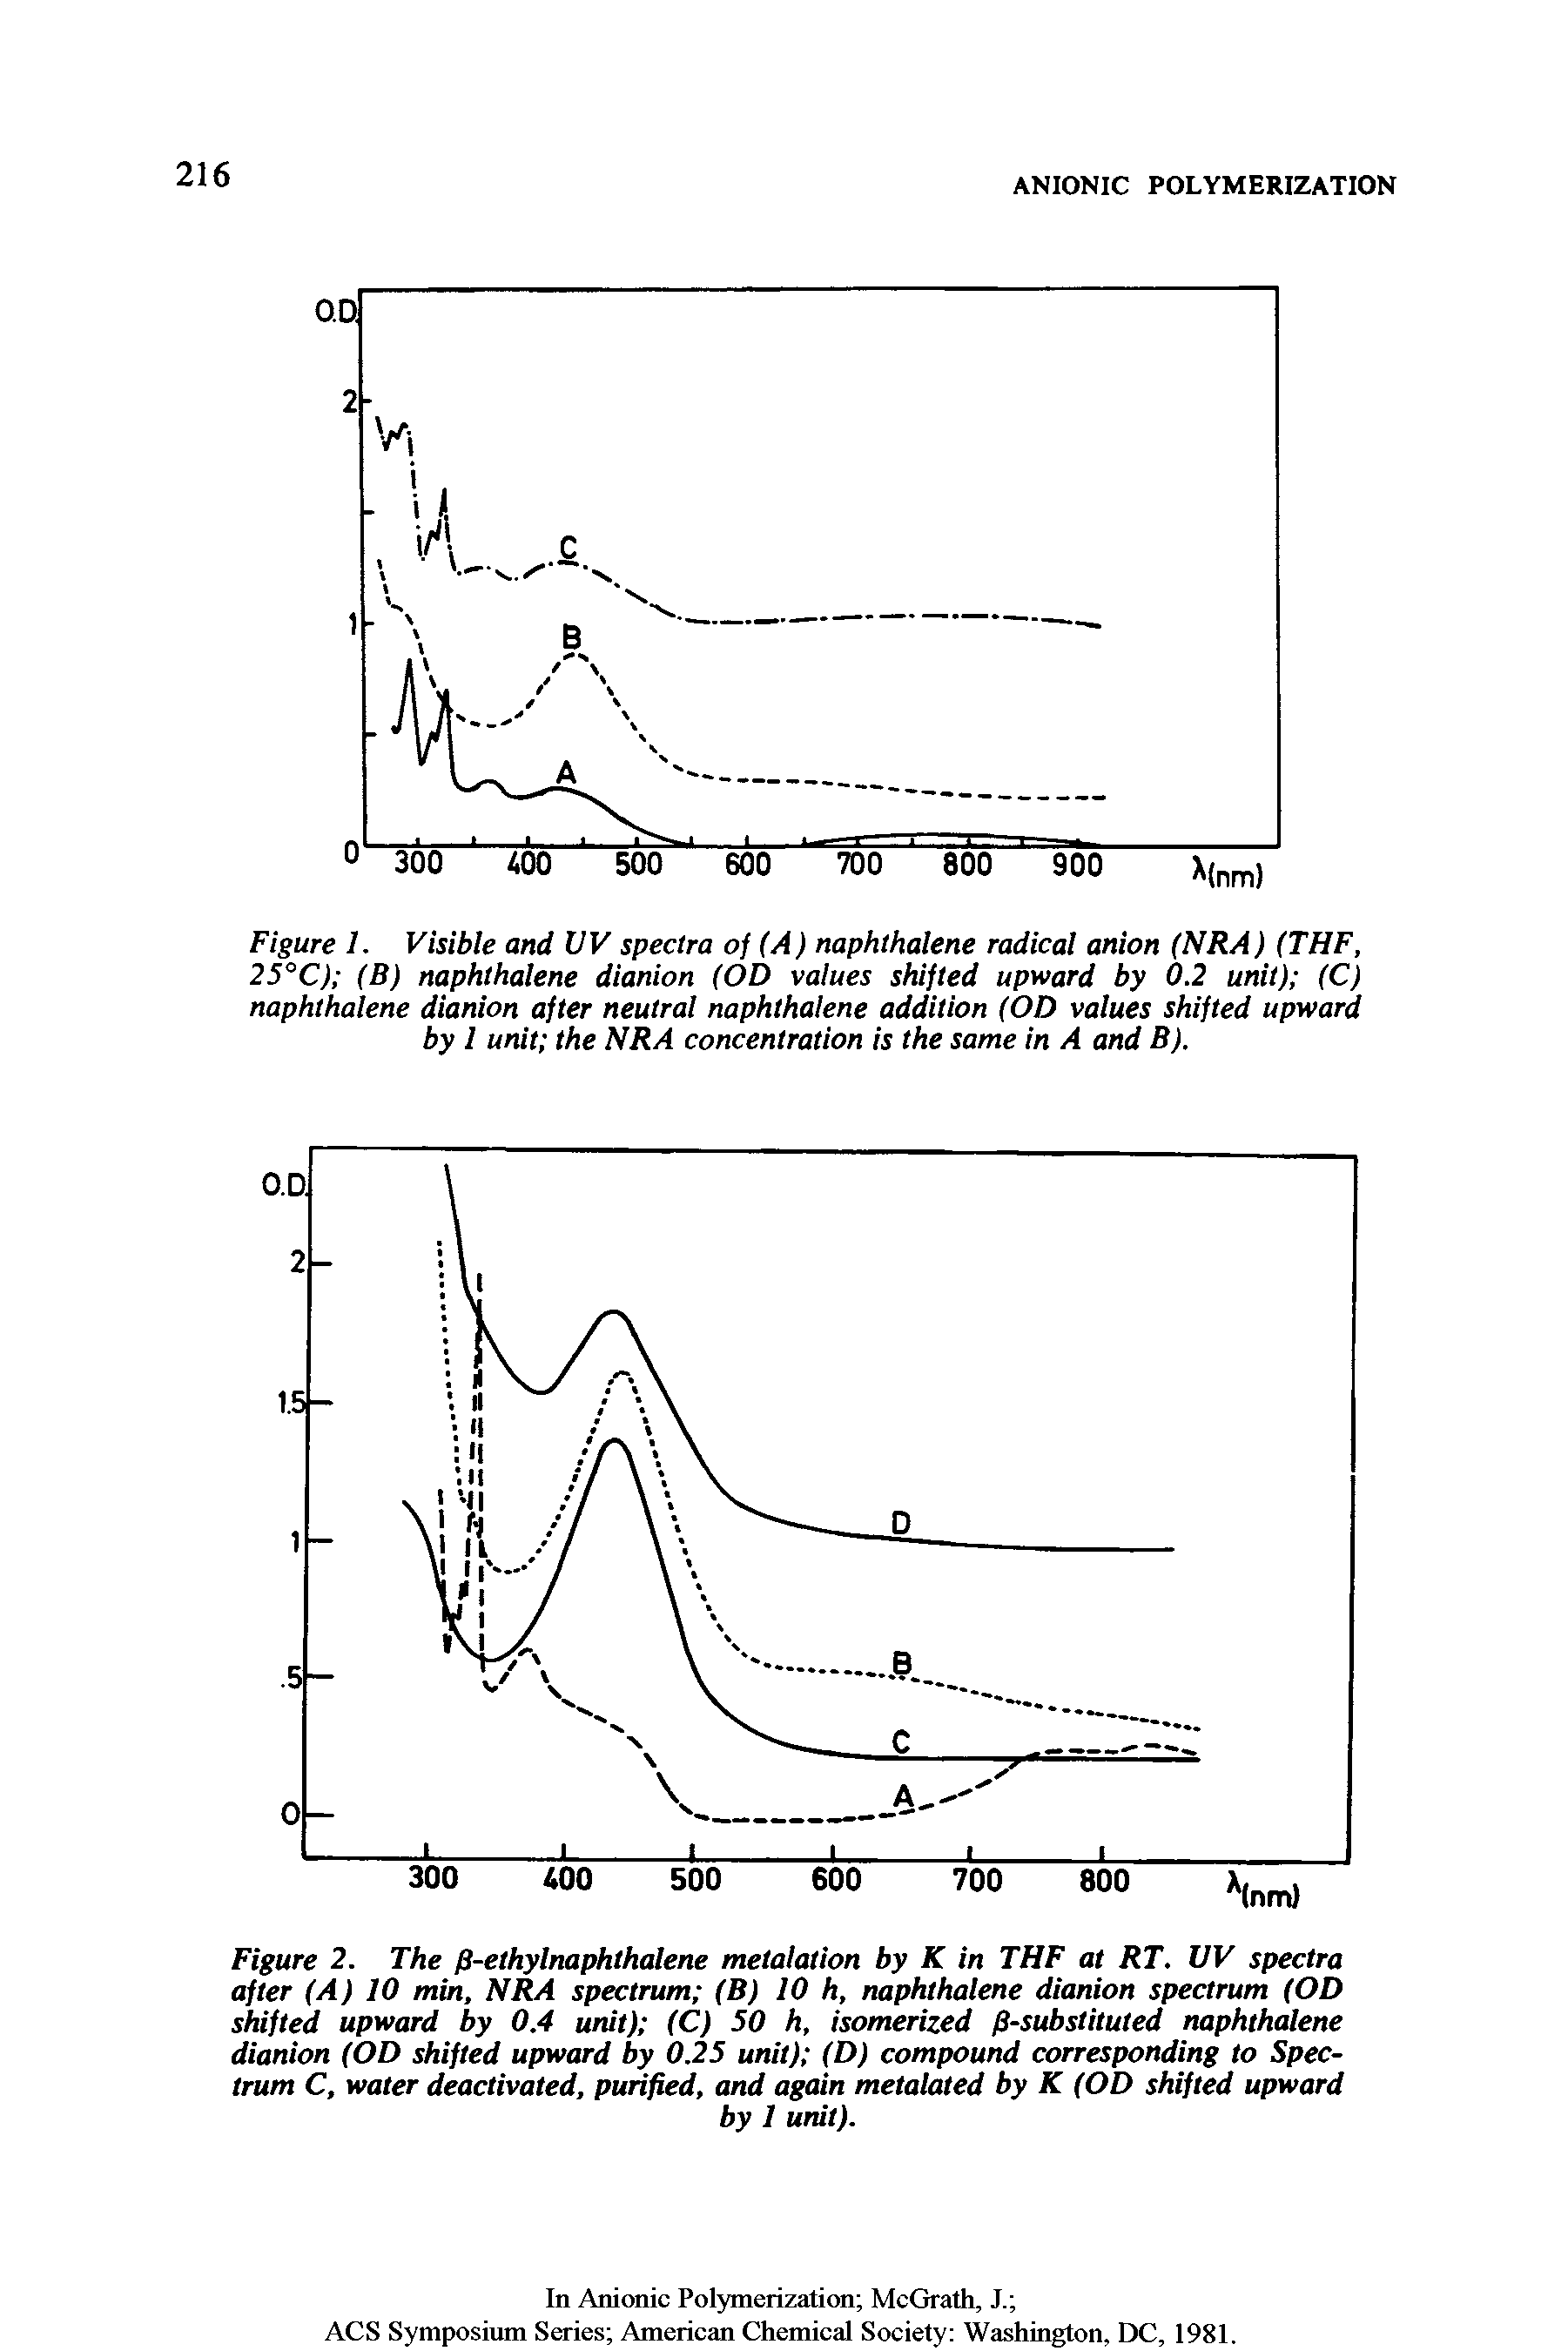 Figure 1. Visible and 11V spectra of (A) naphthalene radical anion (NRA) (THF, 25°C) (B) naphthalene dianion (OD values shifted upward by 0.2 unit) (C) naphthalene dianion after neutral naphthalene addition (OD values shifted upward by 1 unit the NRA concentration is the same in A and ).